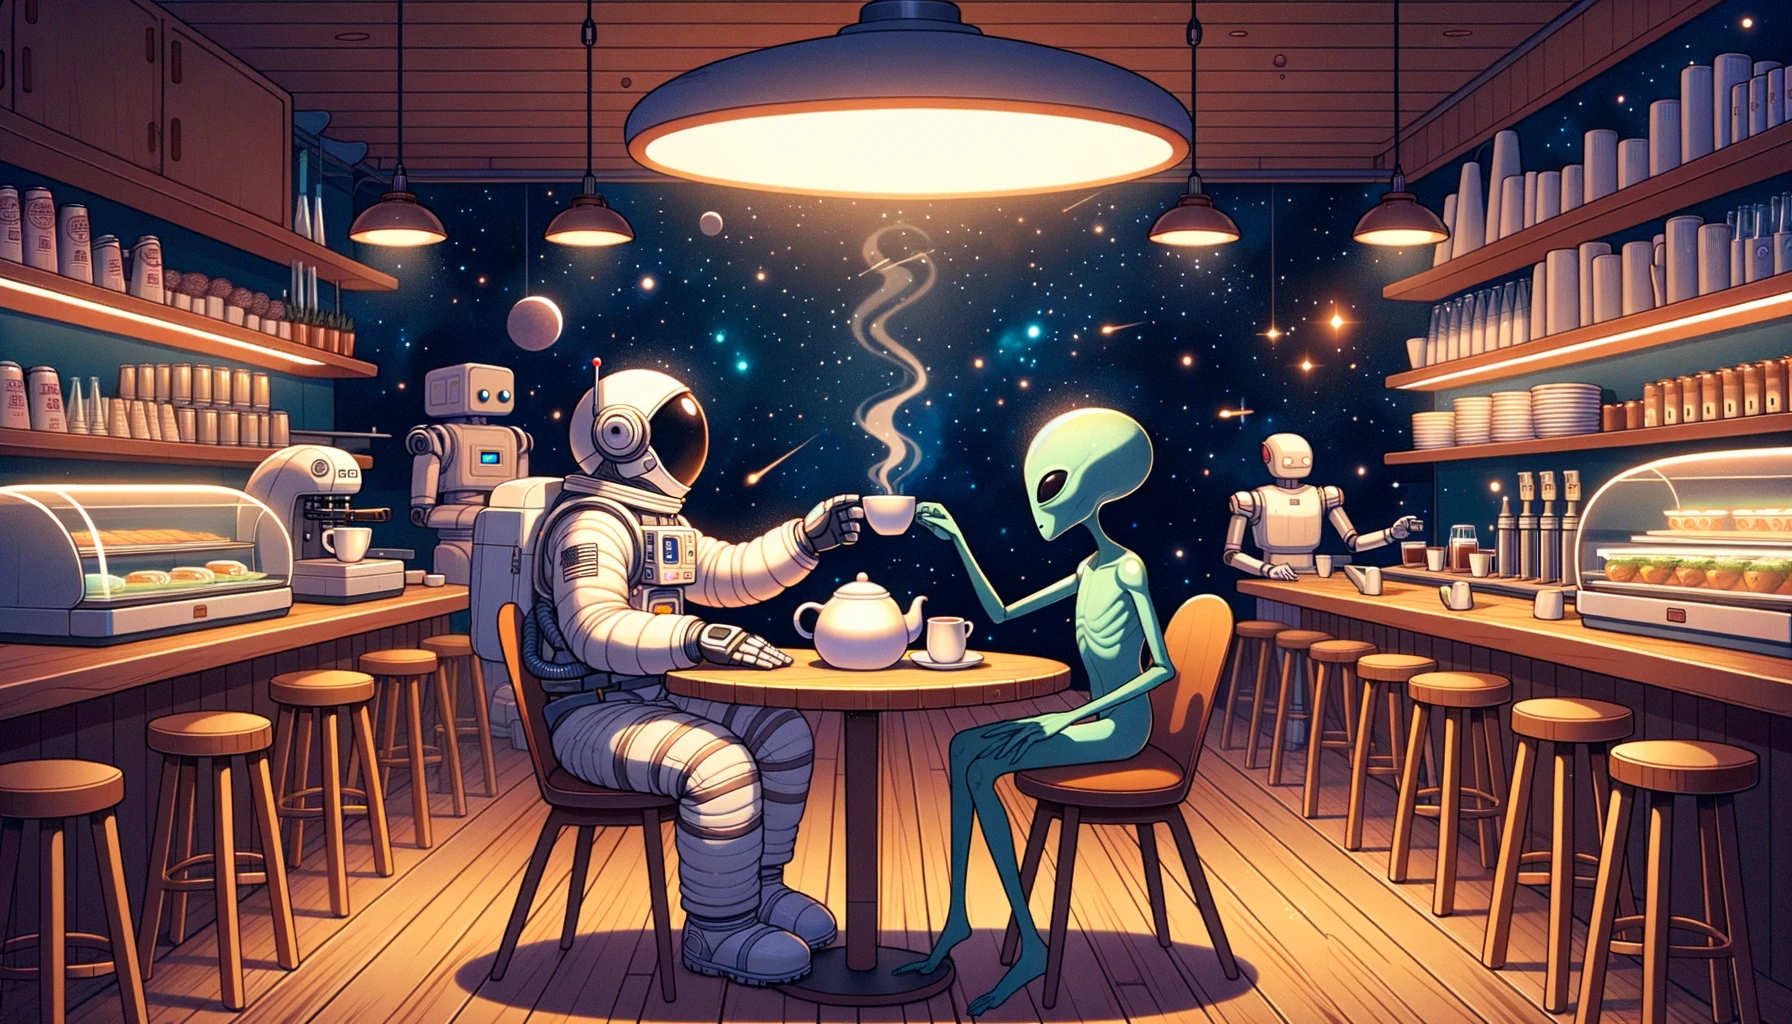 Illustration of a serene moment inside a cafe located somewhere in the cosmos. Wooden tables and soft lighting give the place a cozy feel. A human astronaut, in a casual space suit, shares tea with a friendly alien, its appearance unique yet amiable. The tea they sip on has a luminescent quality, glowing softly. Meanwhile, a robot barista, its design sleek and efficient, is busy brewing drinks, with futuristic machines whirring and beeping in harmony.